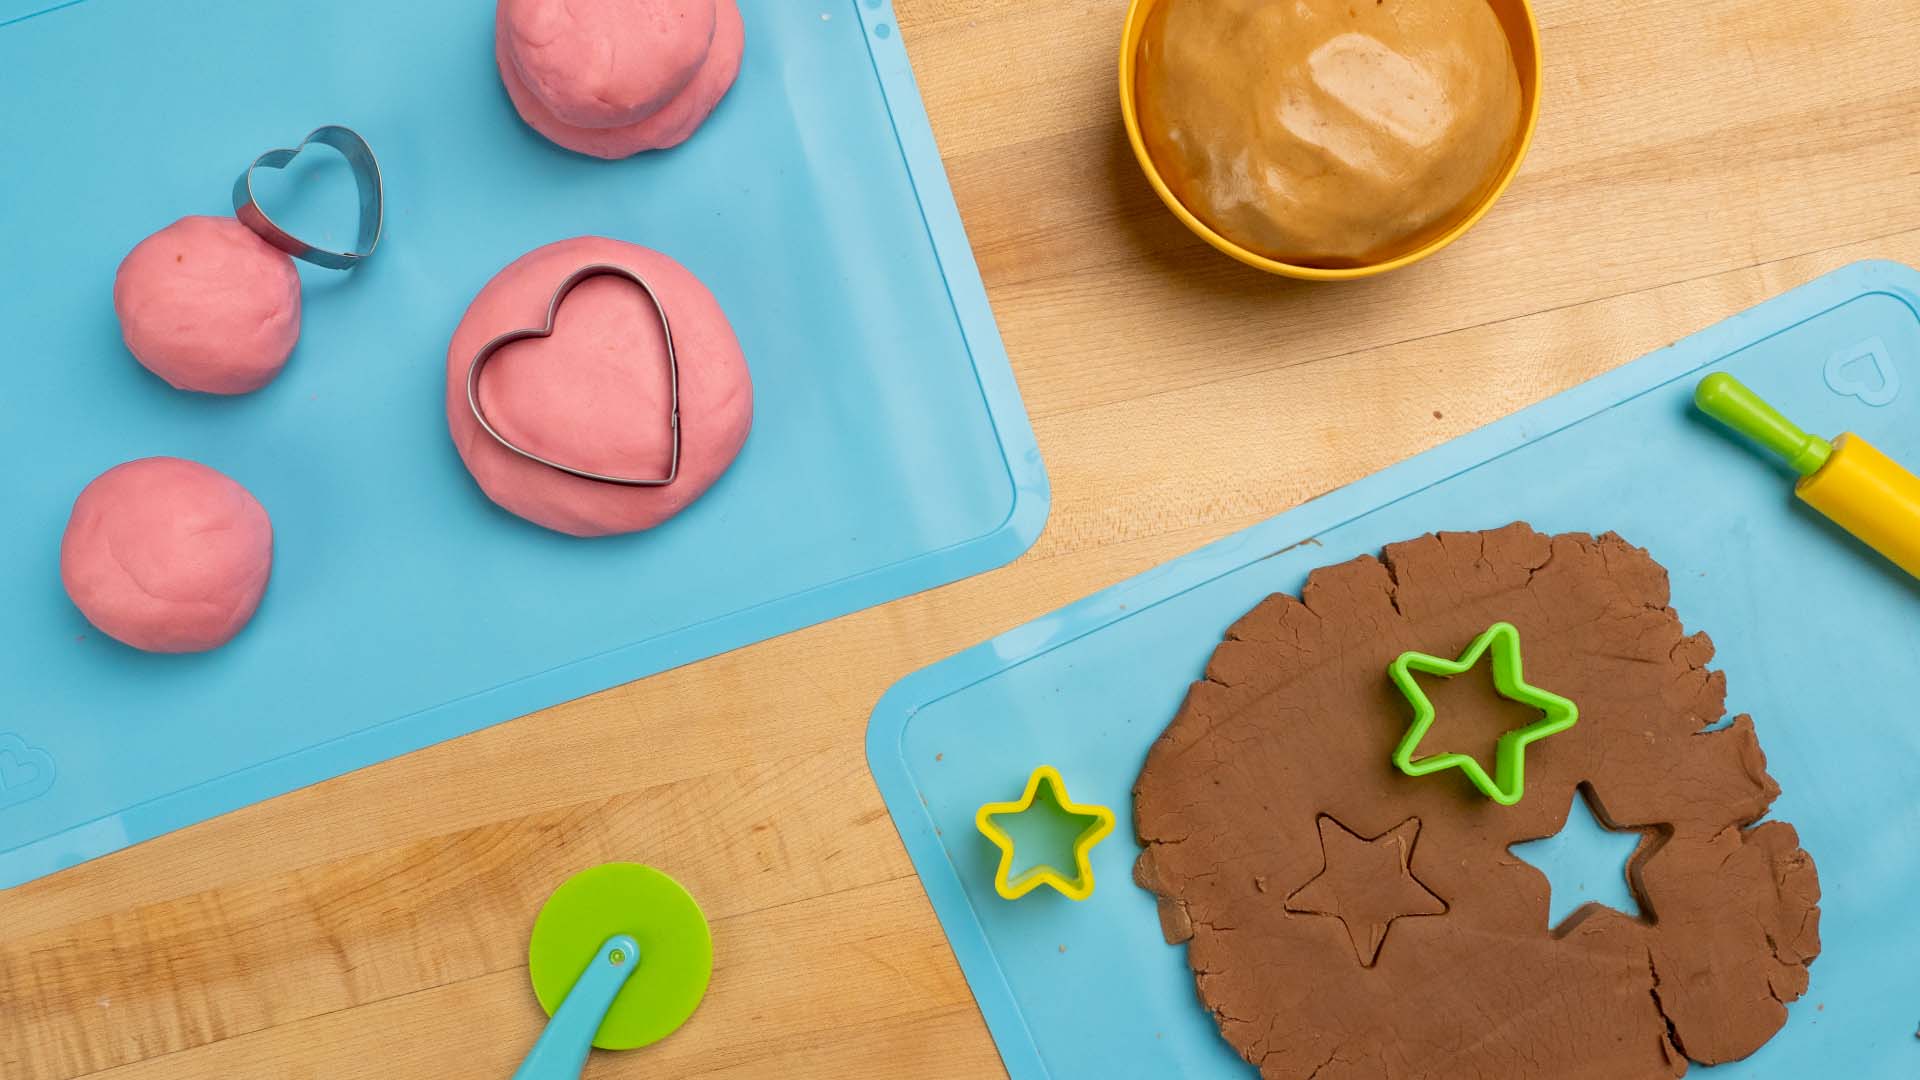 diy homemade play dough being cut into different shapes